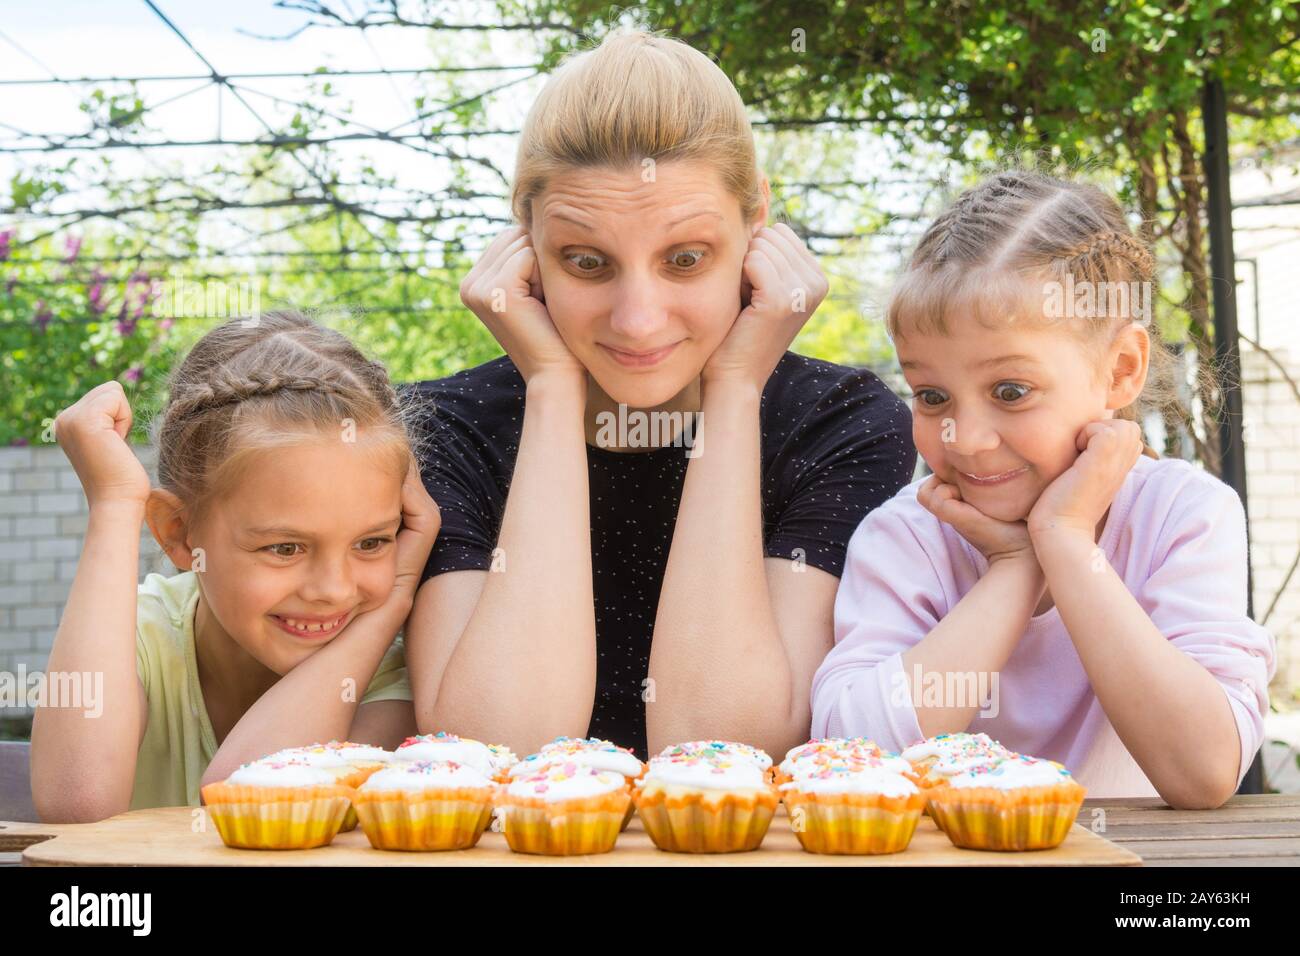 Mother and two daughters with a good appetite and big eyes looking at easter cupcakes Stock Photo